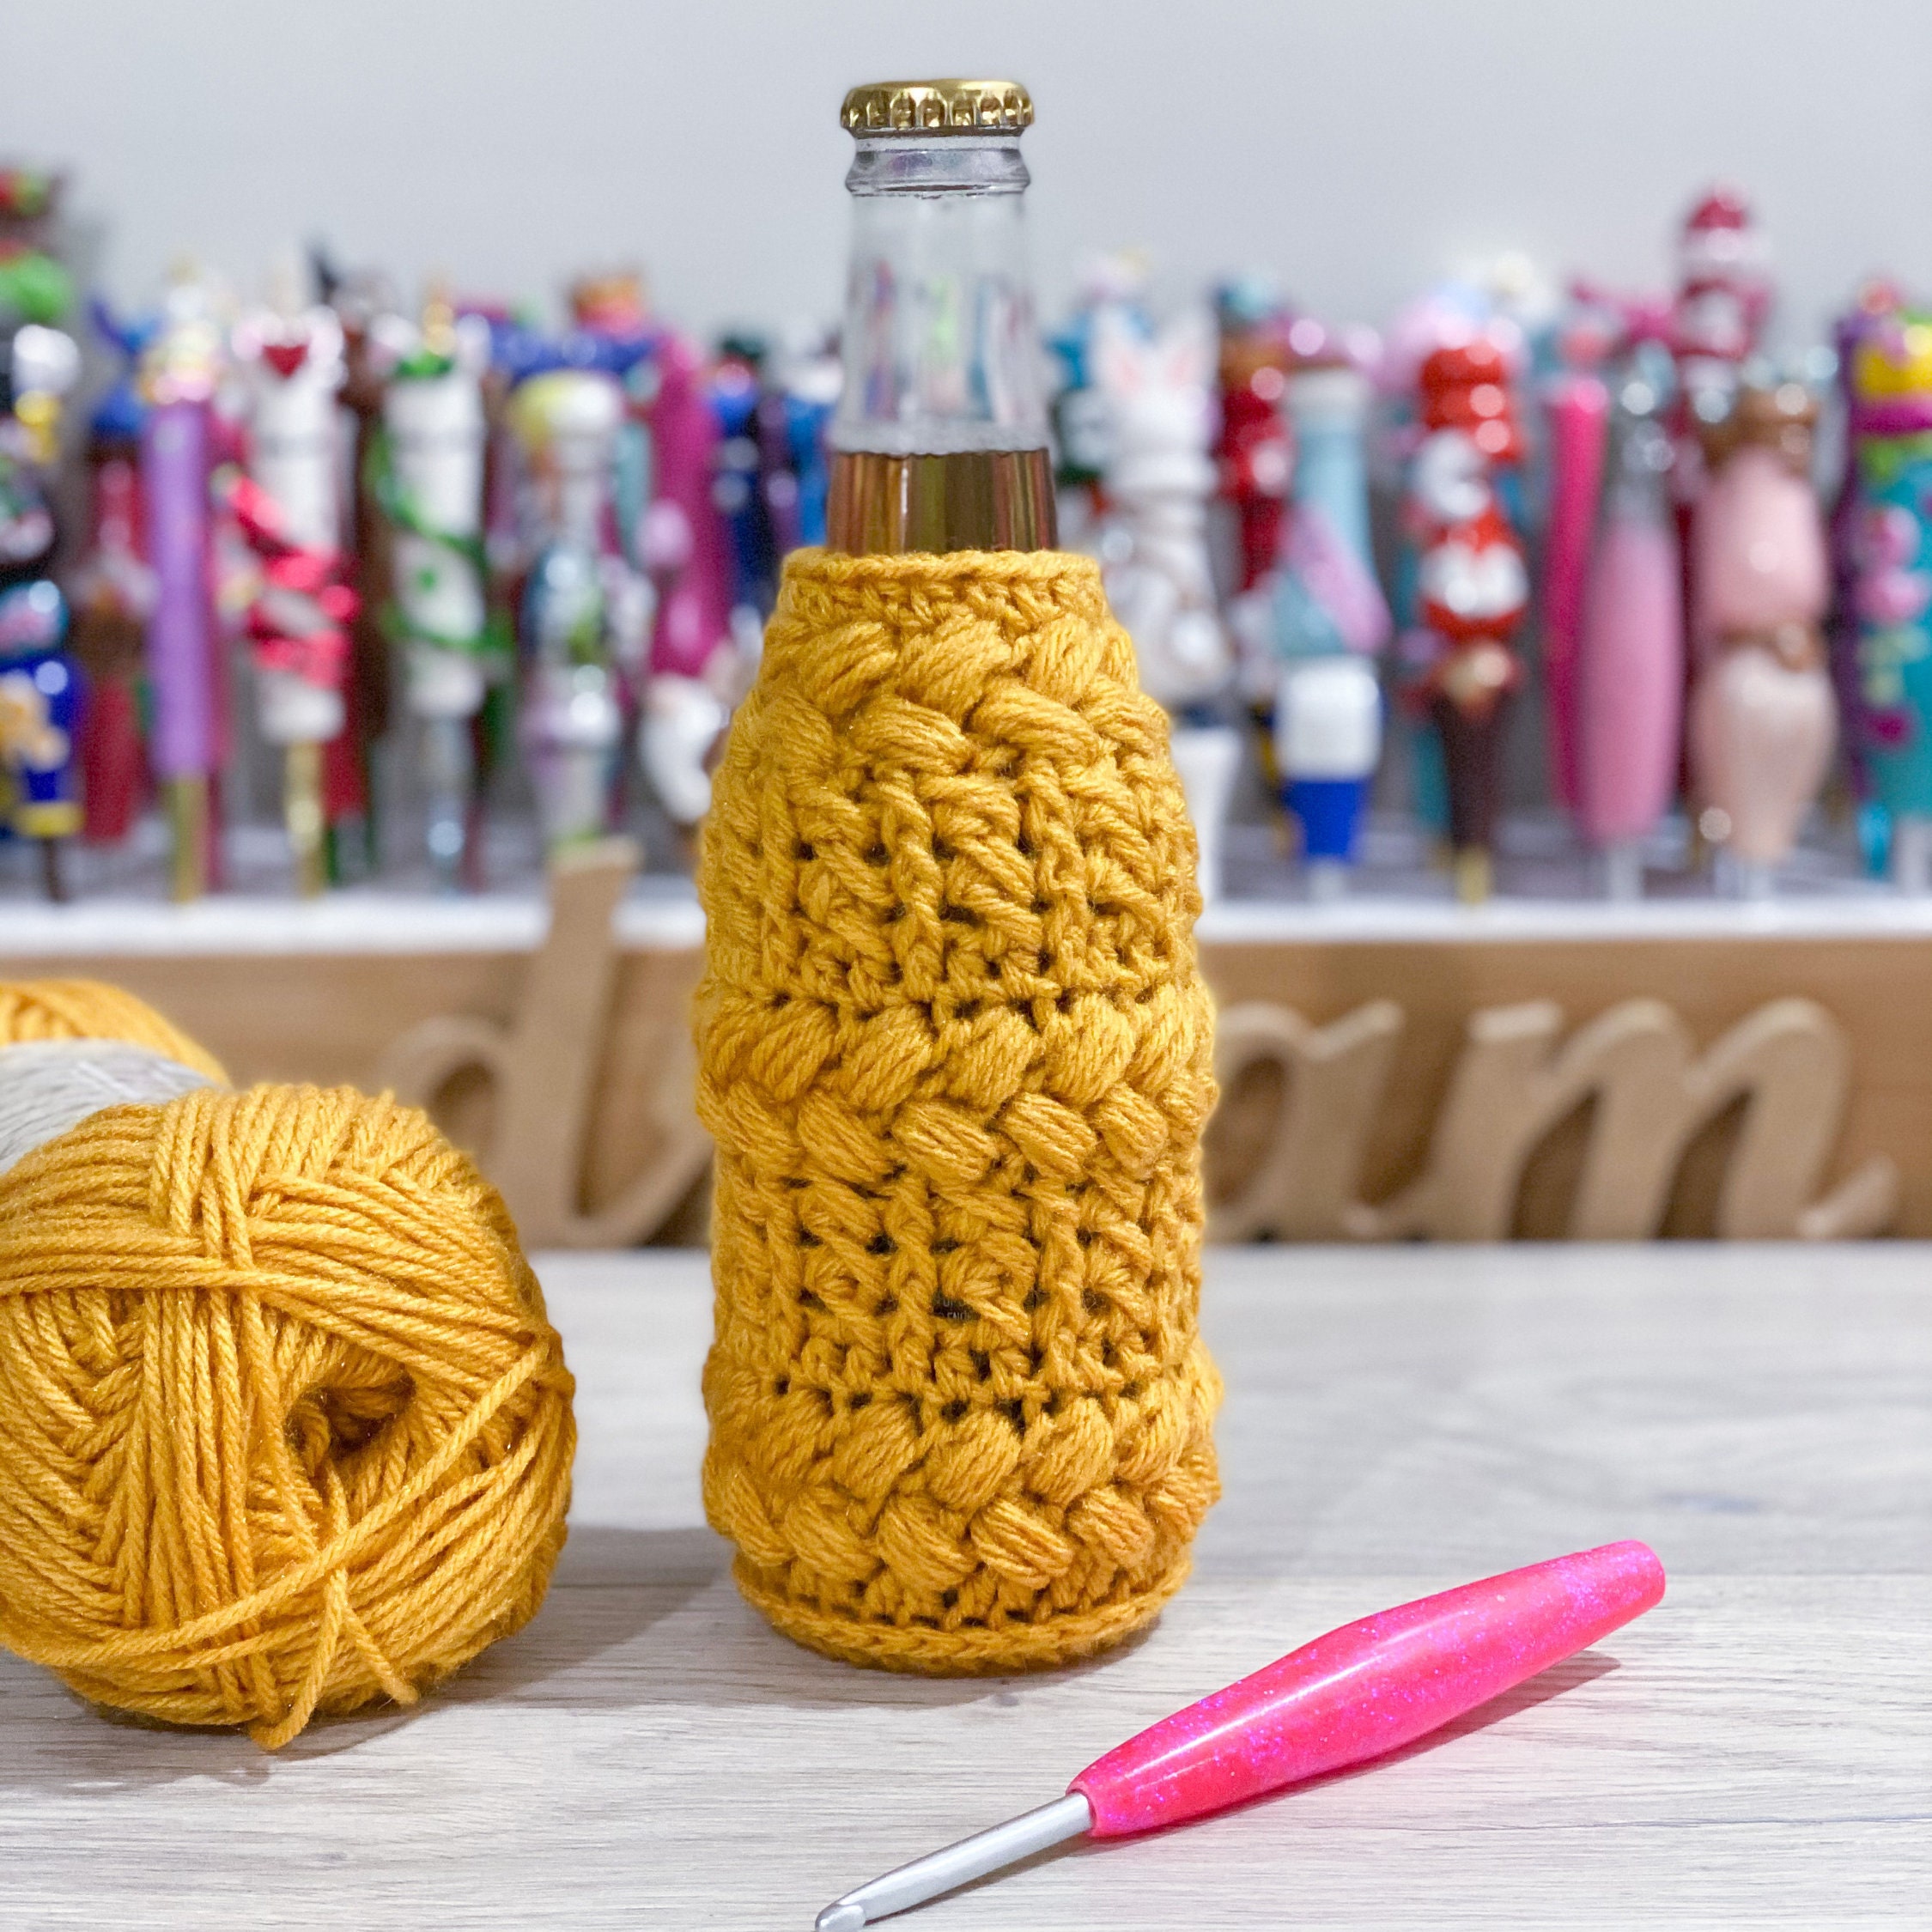 Perfectly Braided Beer Cozy Crochet Pattern Cozy Beer Cozy - Etsy